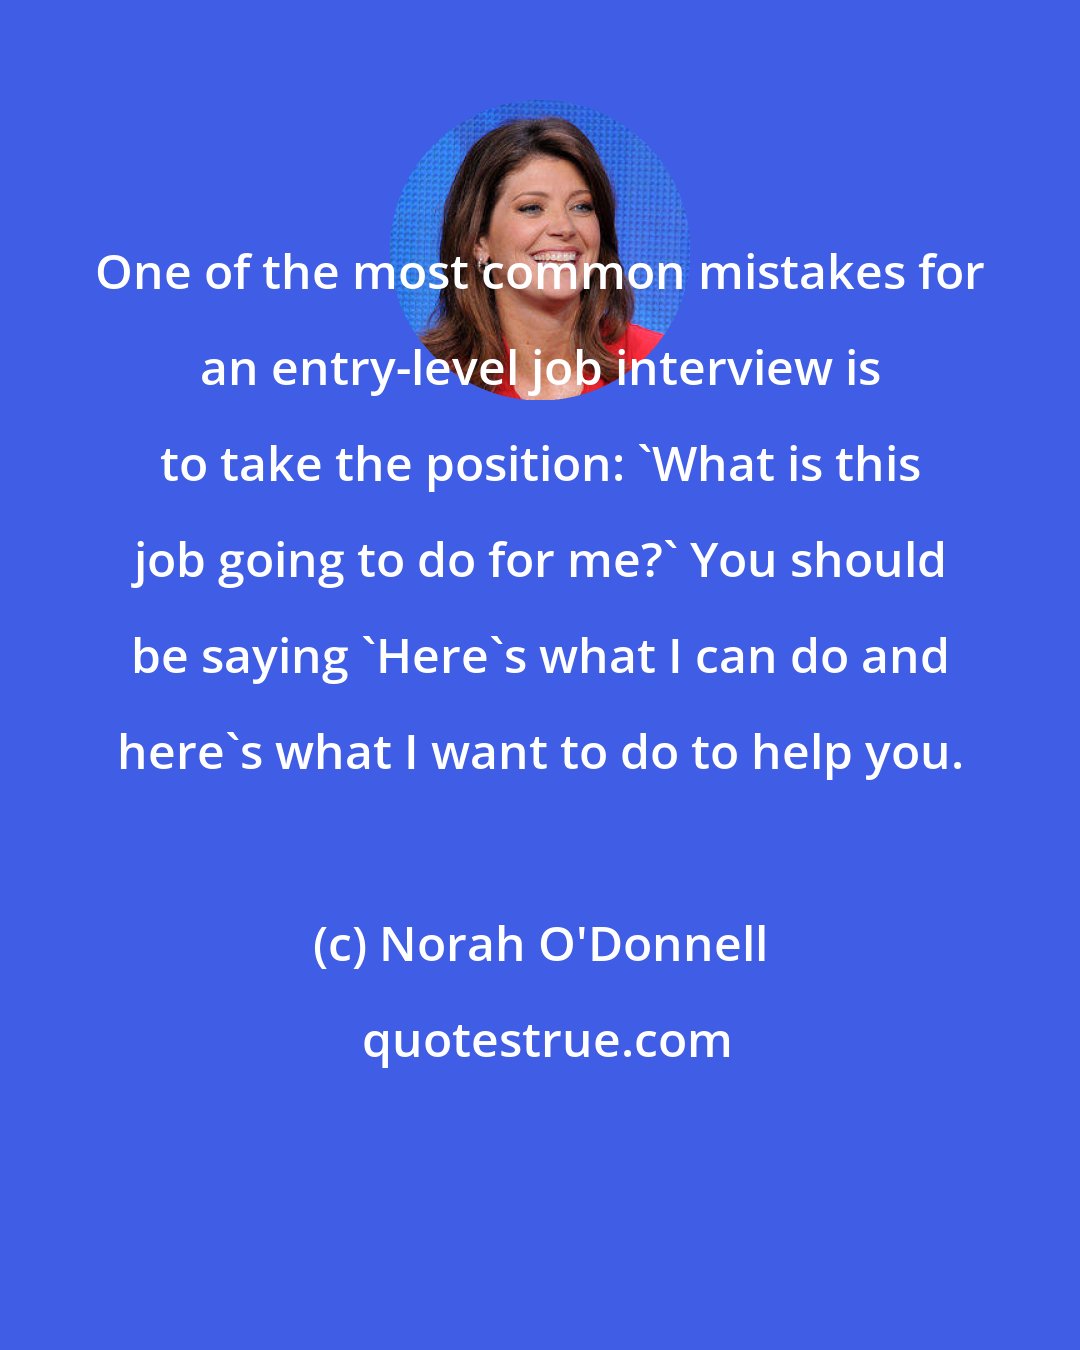 Norah O'Donnell: One of the most common mistakes for an entry-level job interview is to take the position: 'What is this job going to do for me?' You should be saying 'Here's what I can do and here's what I want to do to help you.